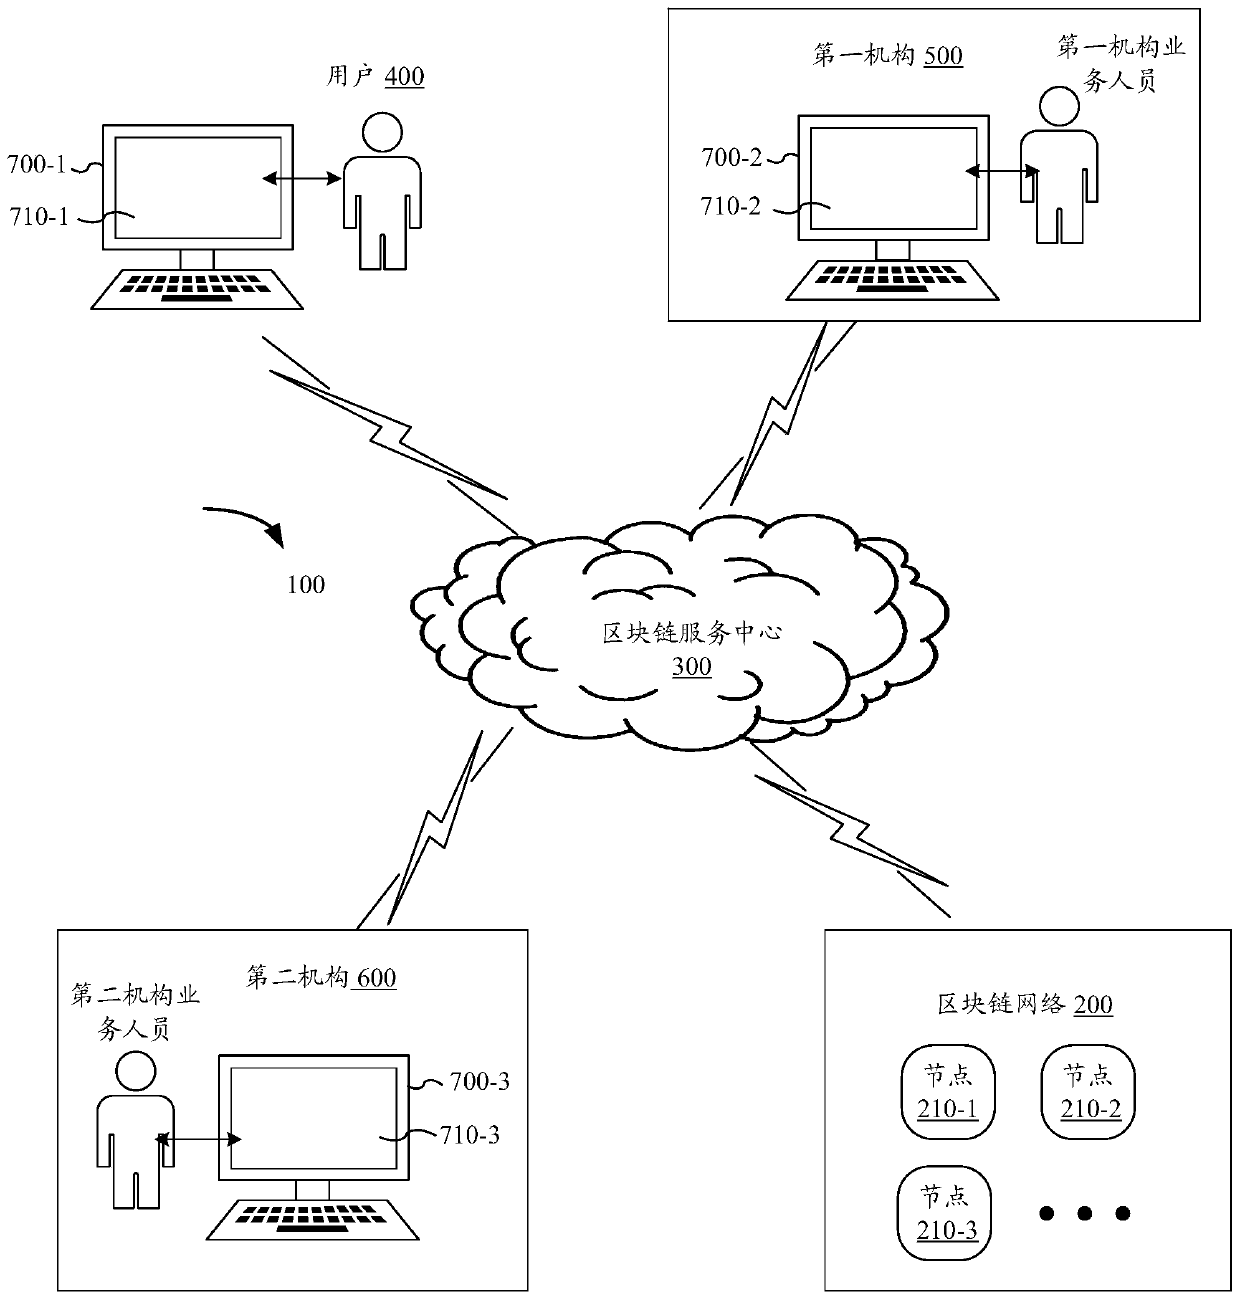 Virtual asset processing method and device based on block chain network